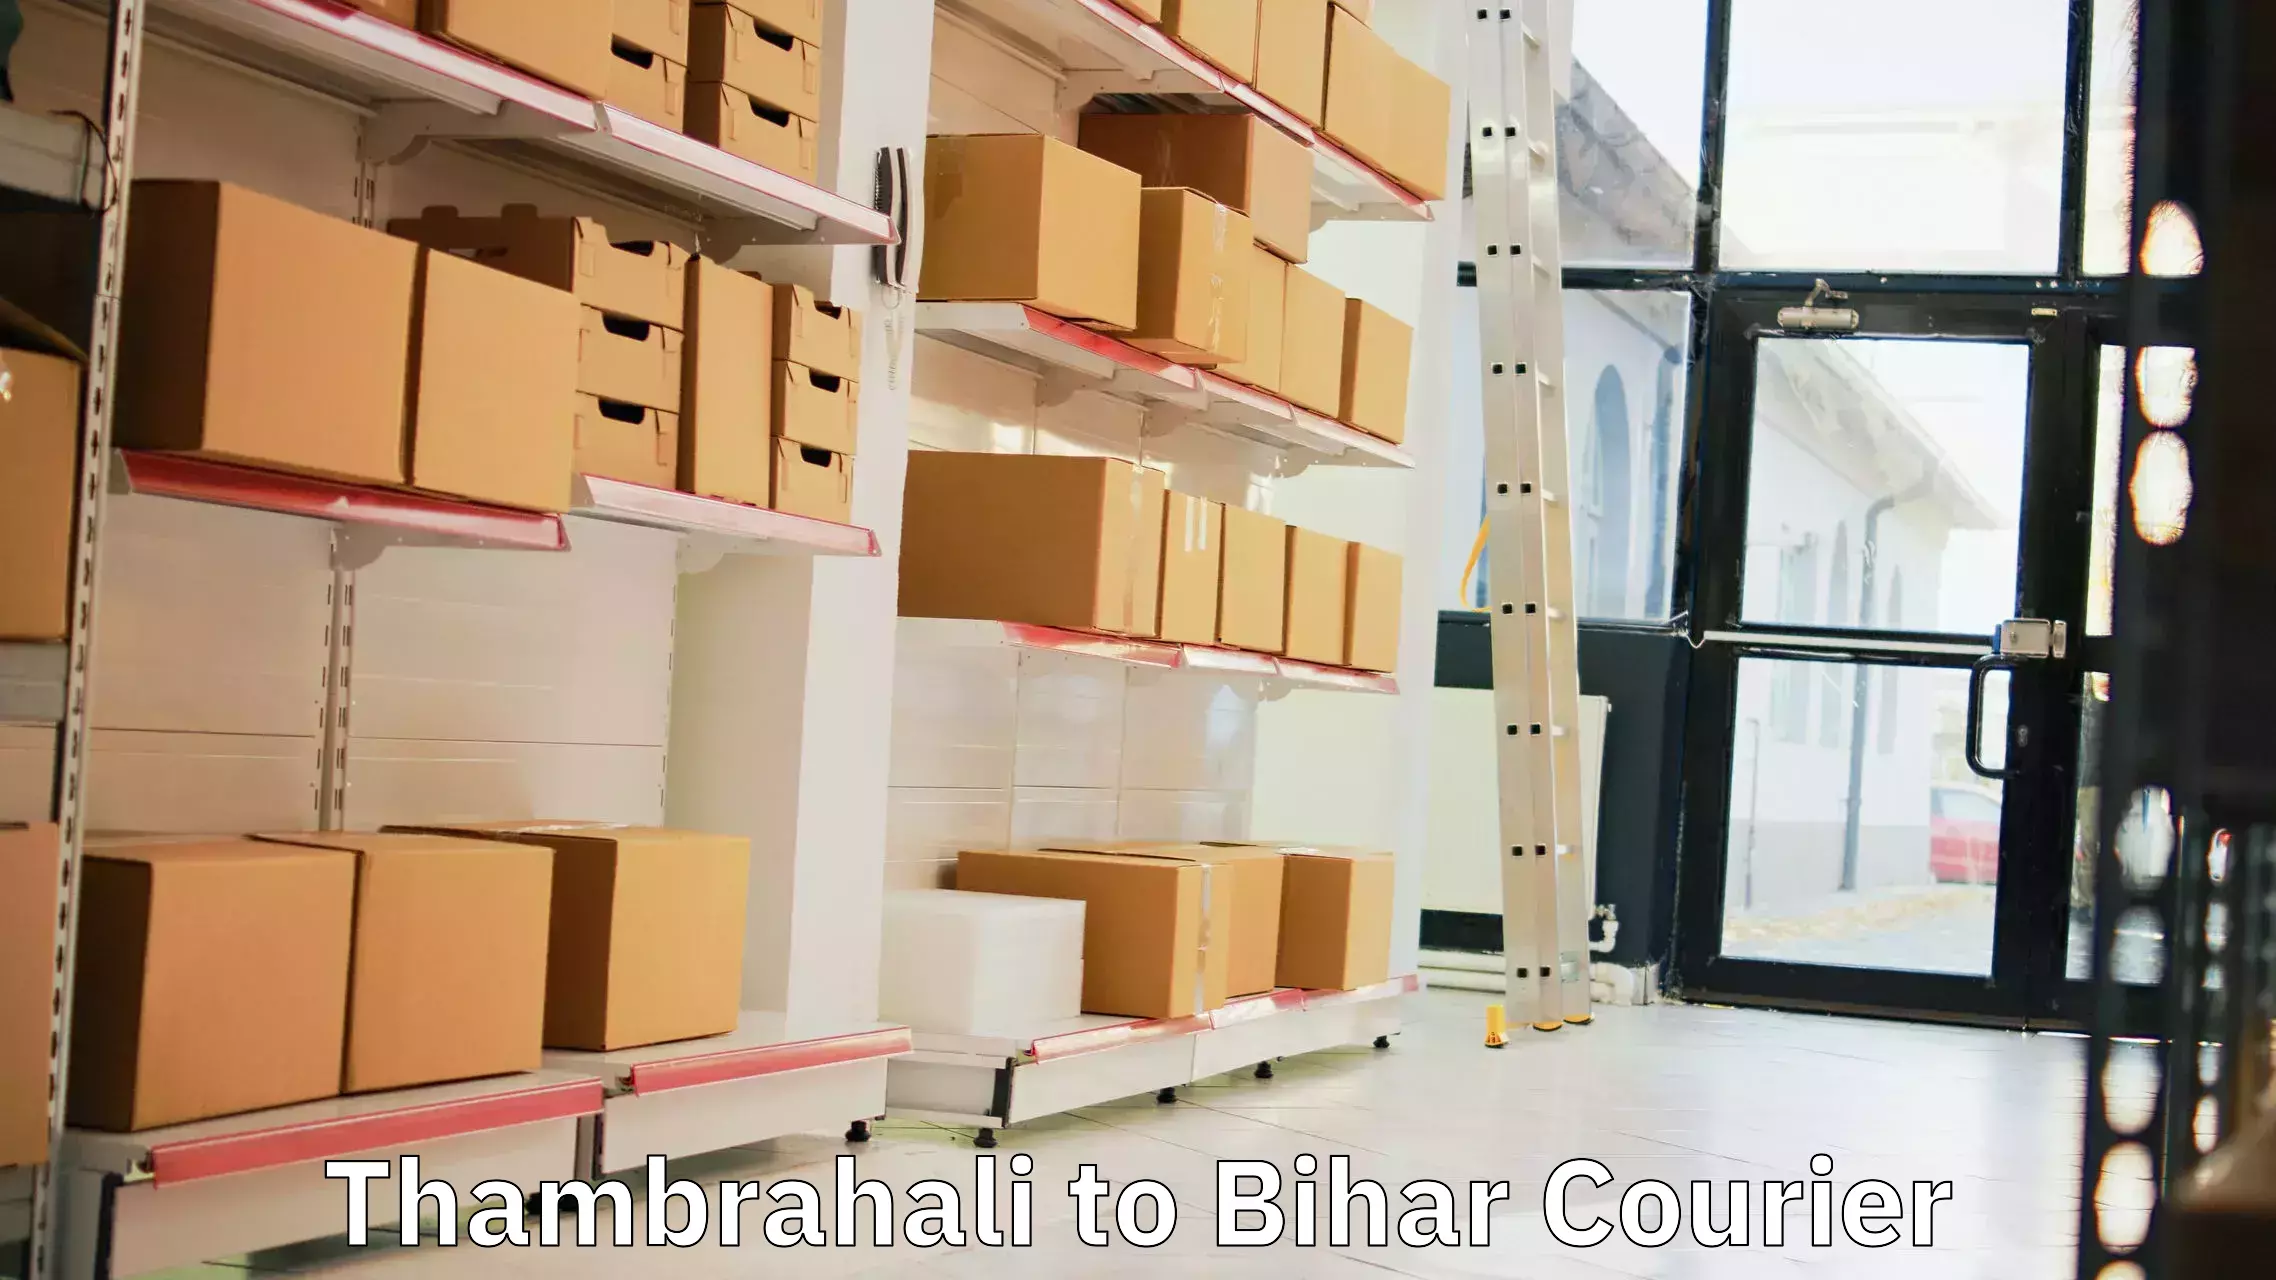 Courier service comparison Thambrahali to IIT Patna